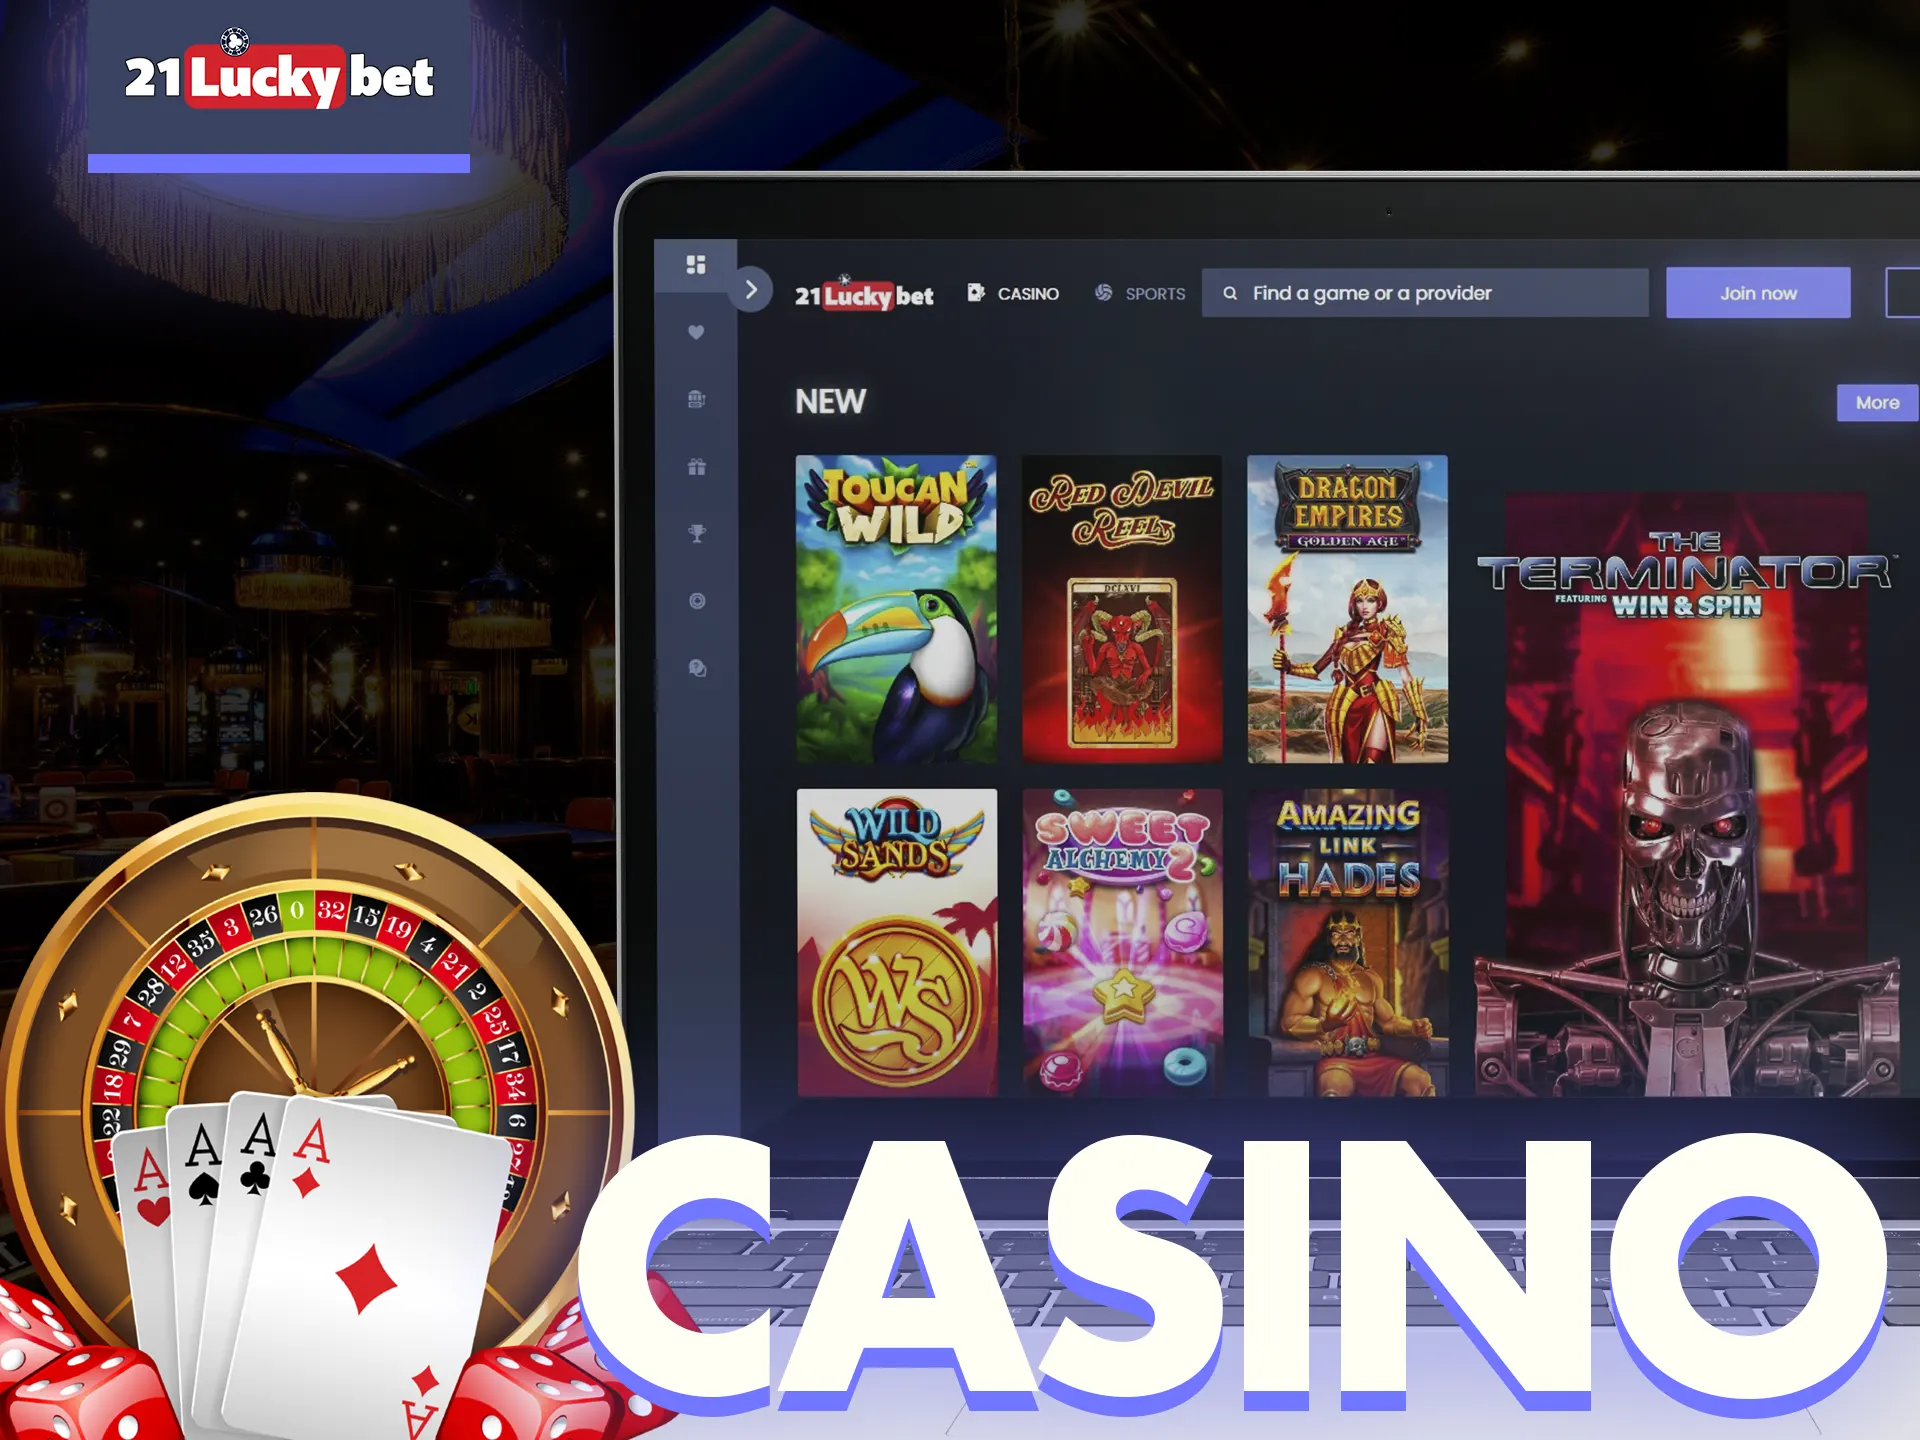 Play exciting games at 21luckybet Casino.